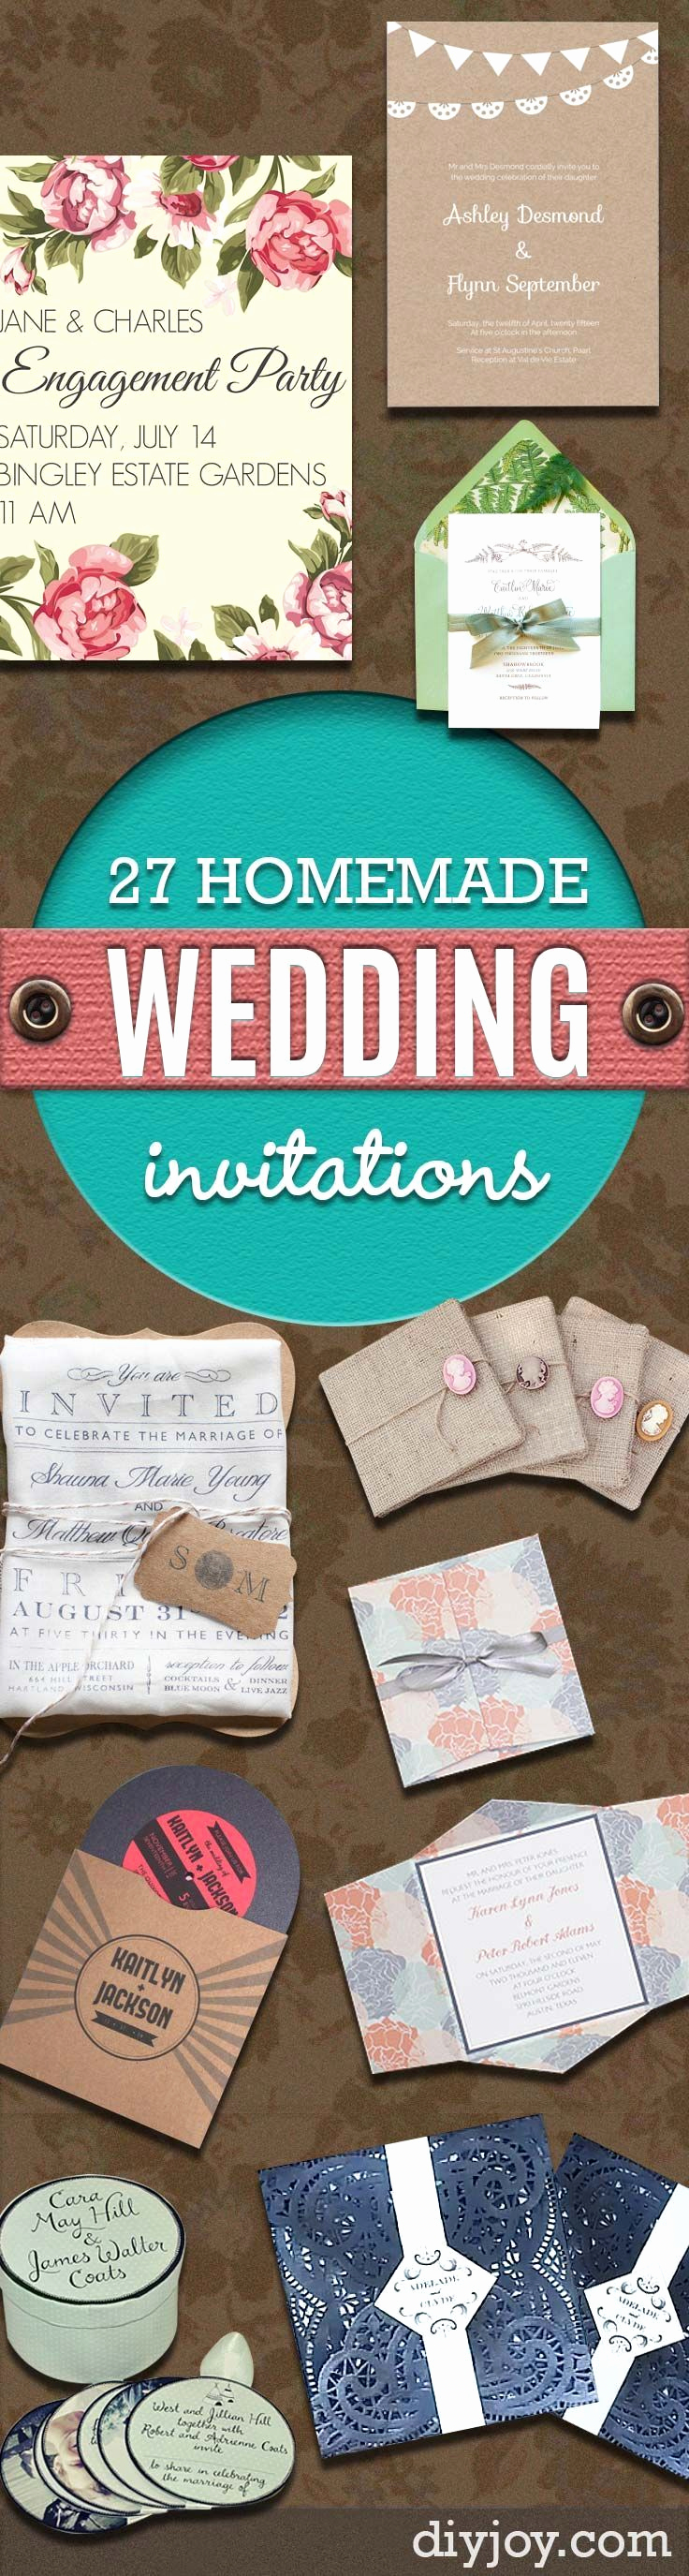 How to Make Homemade Invitation Unique Best 25 Homemade Invitations Ideas On Pinterest